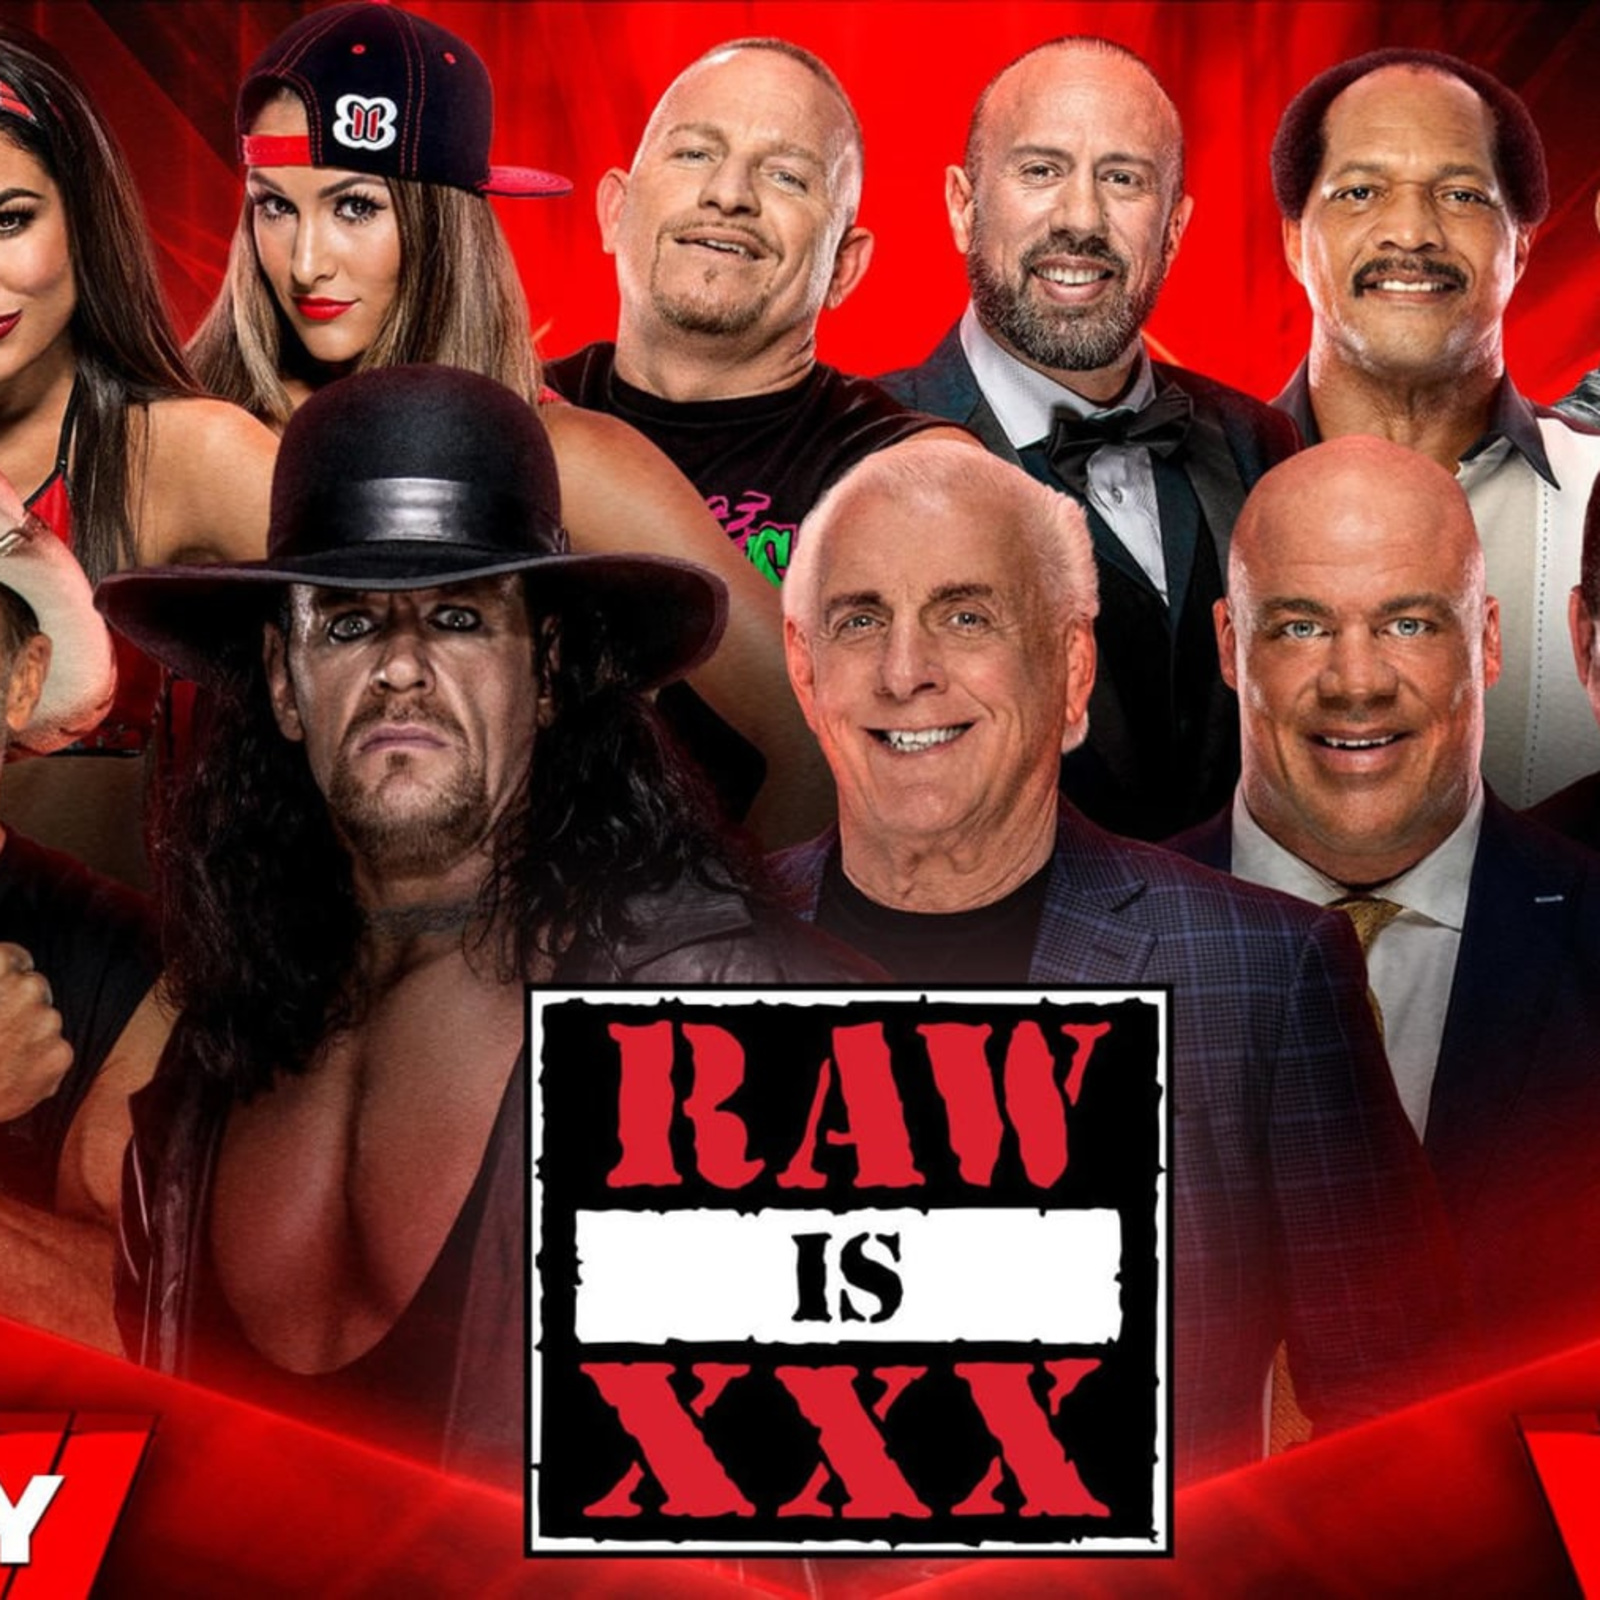 Saniliwan X X X Kilips - WWE Raw is XXX Results: Winners, Grades, Reaction and Highlights | News,  Scores, Highlights, Stats, and Rumors | Bleacher Report